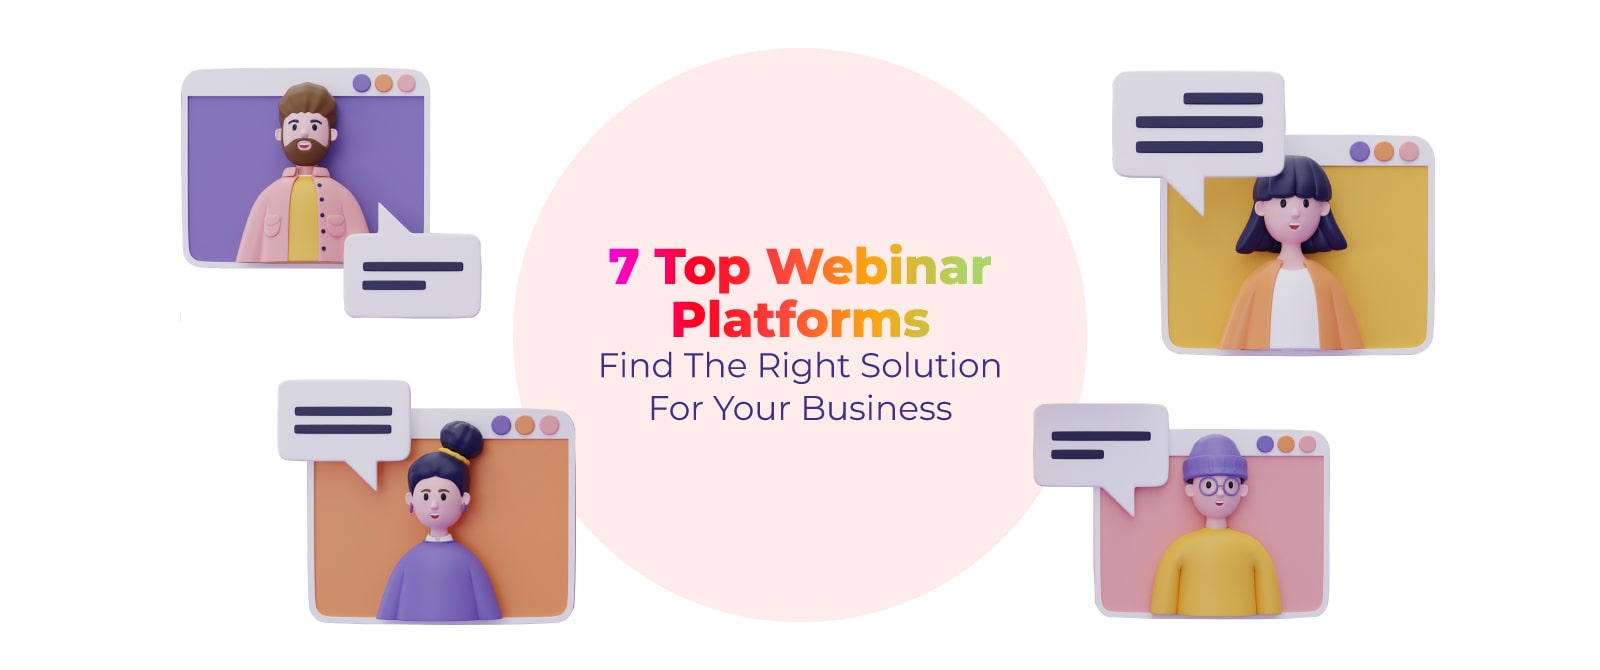 7 Top Webinar Platforms: Find the Right Solution for Your Business